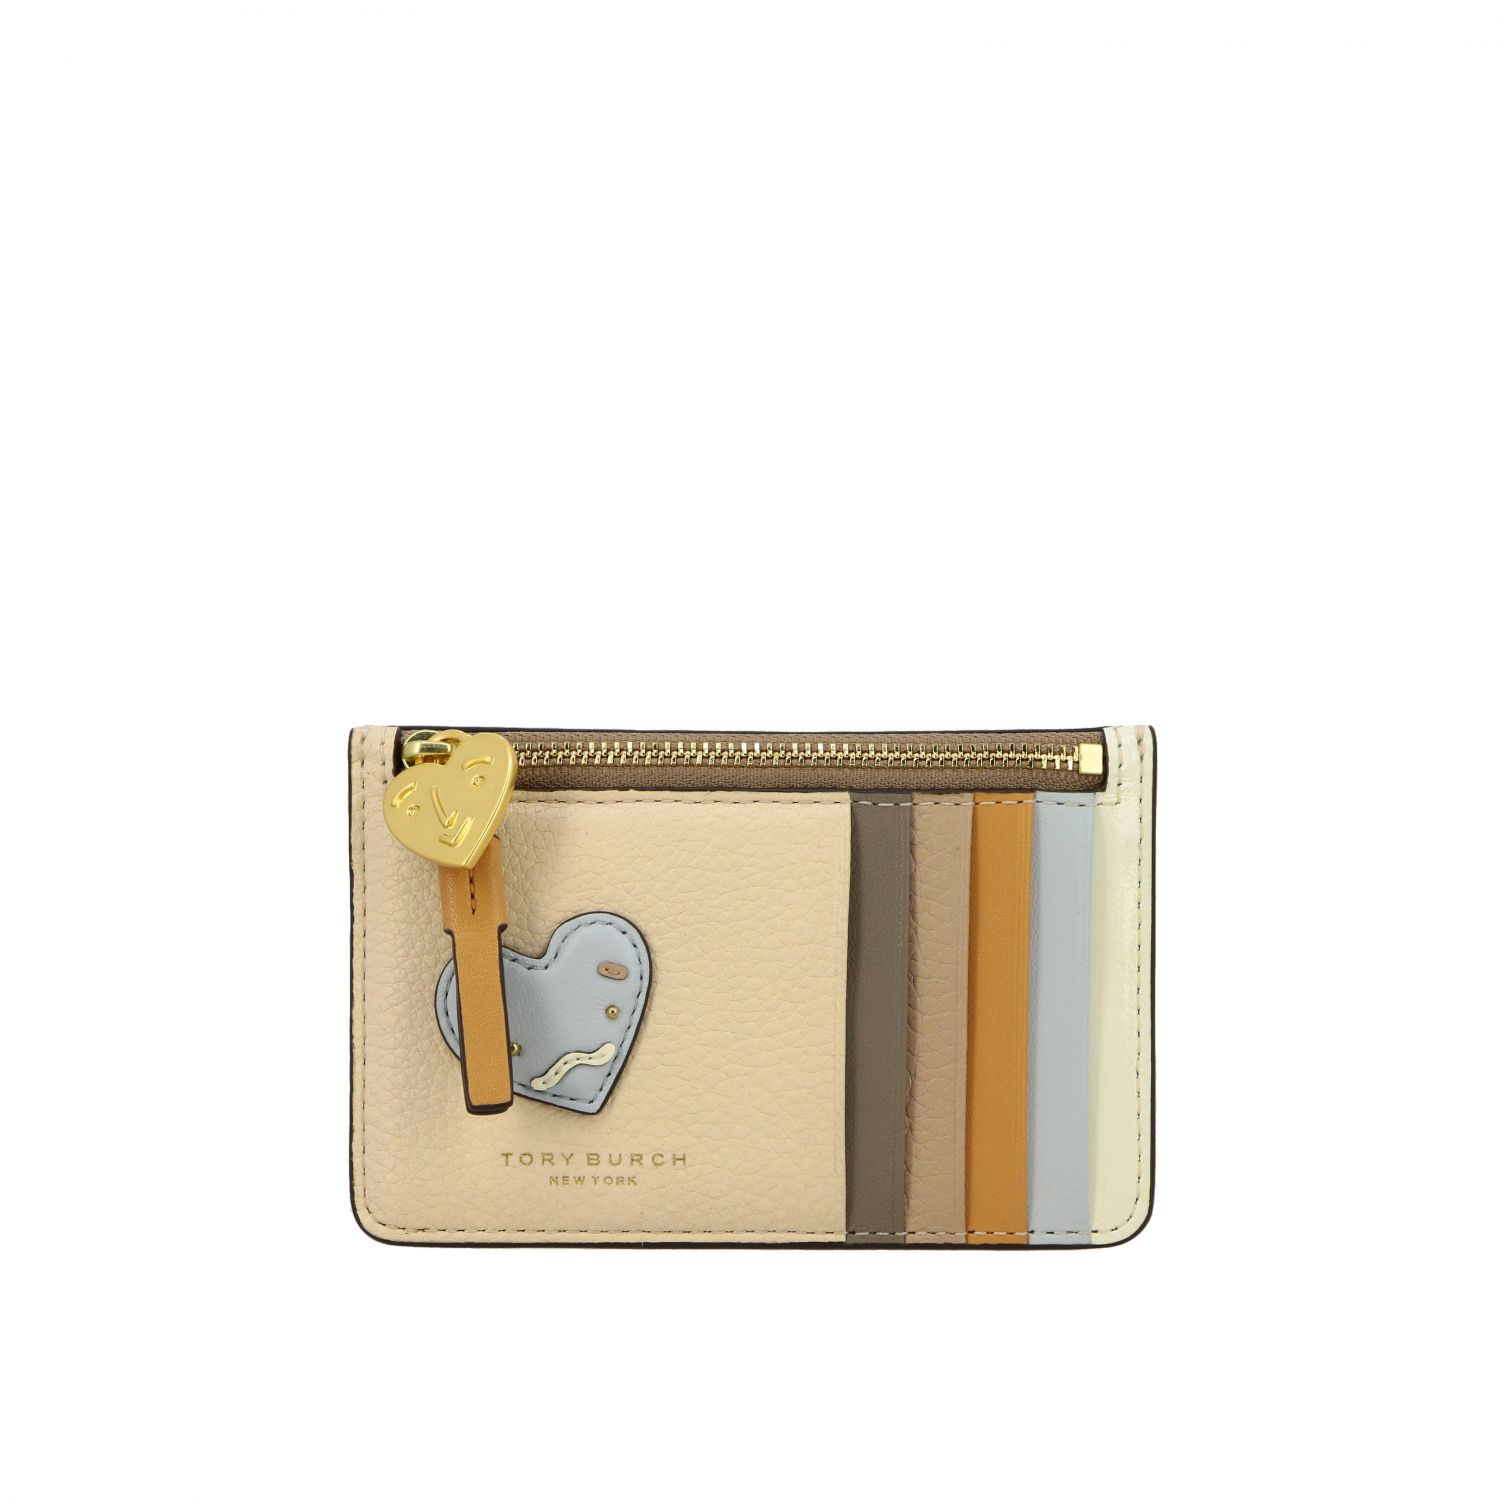 Tory Burch Outlet: credit card holder in multicolor leather with  heart-shaped patch - Multicolor | Tory Burch wallet 61090 online on  